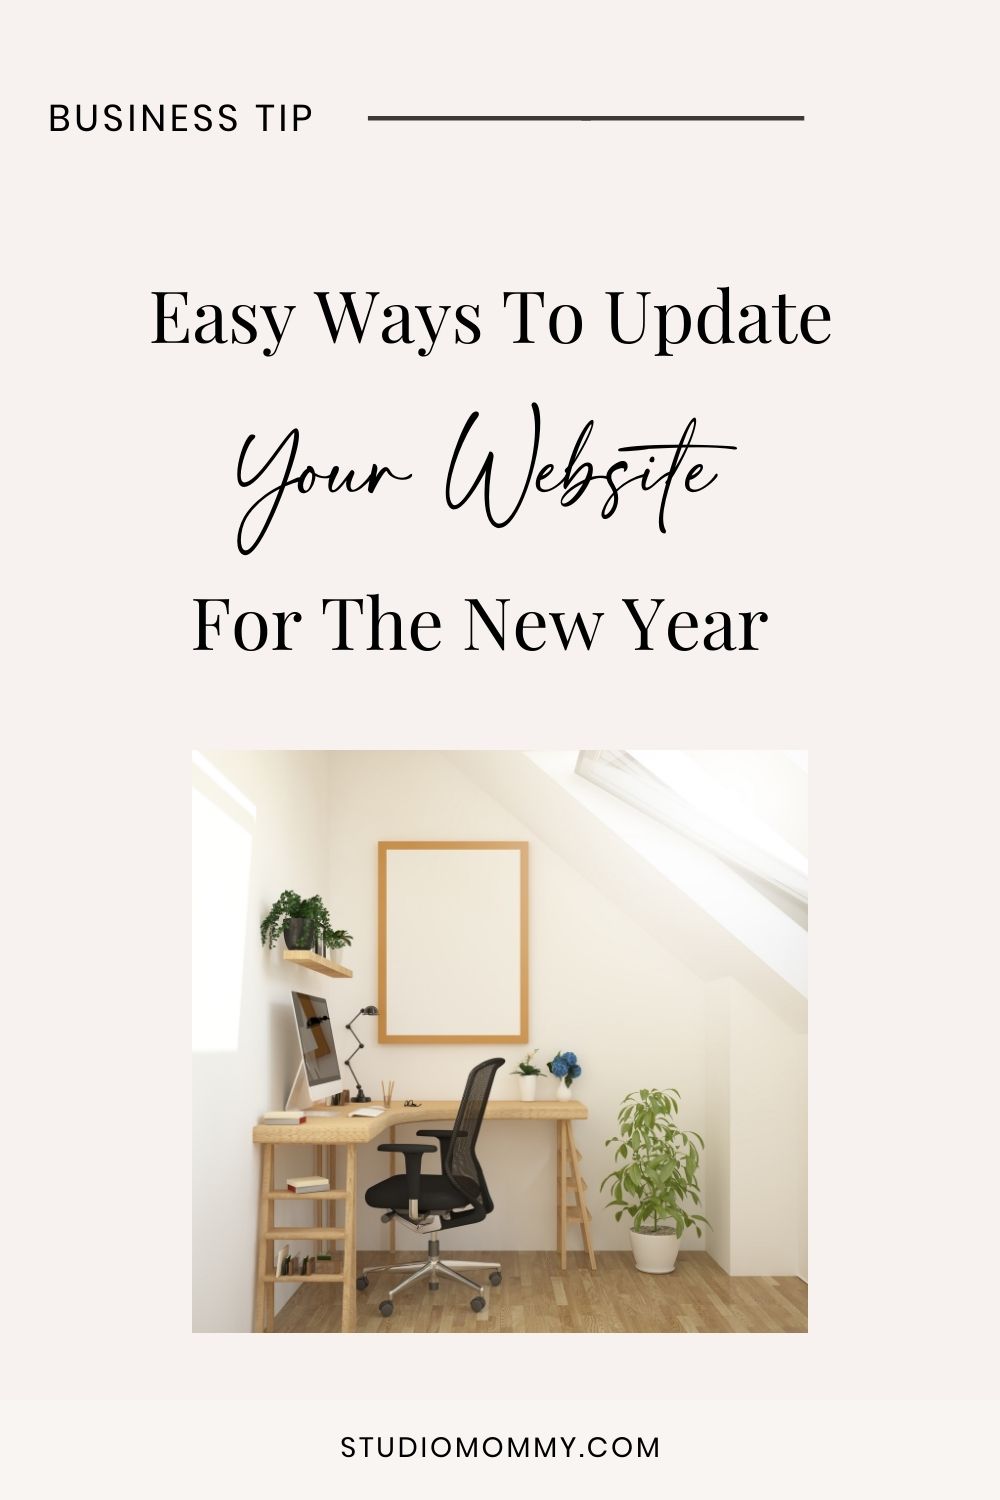 The beginning of a New Year is a great time to examine and update your website!  Keeping your website updated will ensure your current customers that you stay informed of current trends and important updates.  And, more importantly, improve your website’s Search Engine Optimization, page speed and so much more!  Here are a few easy ways to update your website for the new year. #studiomommy